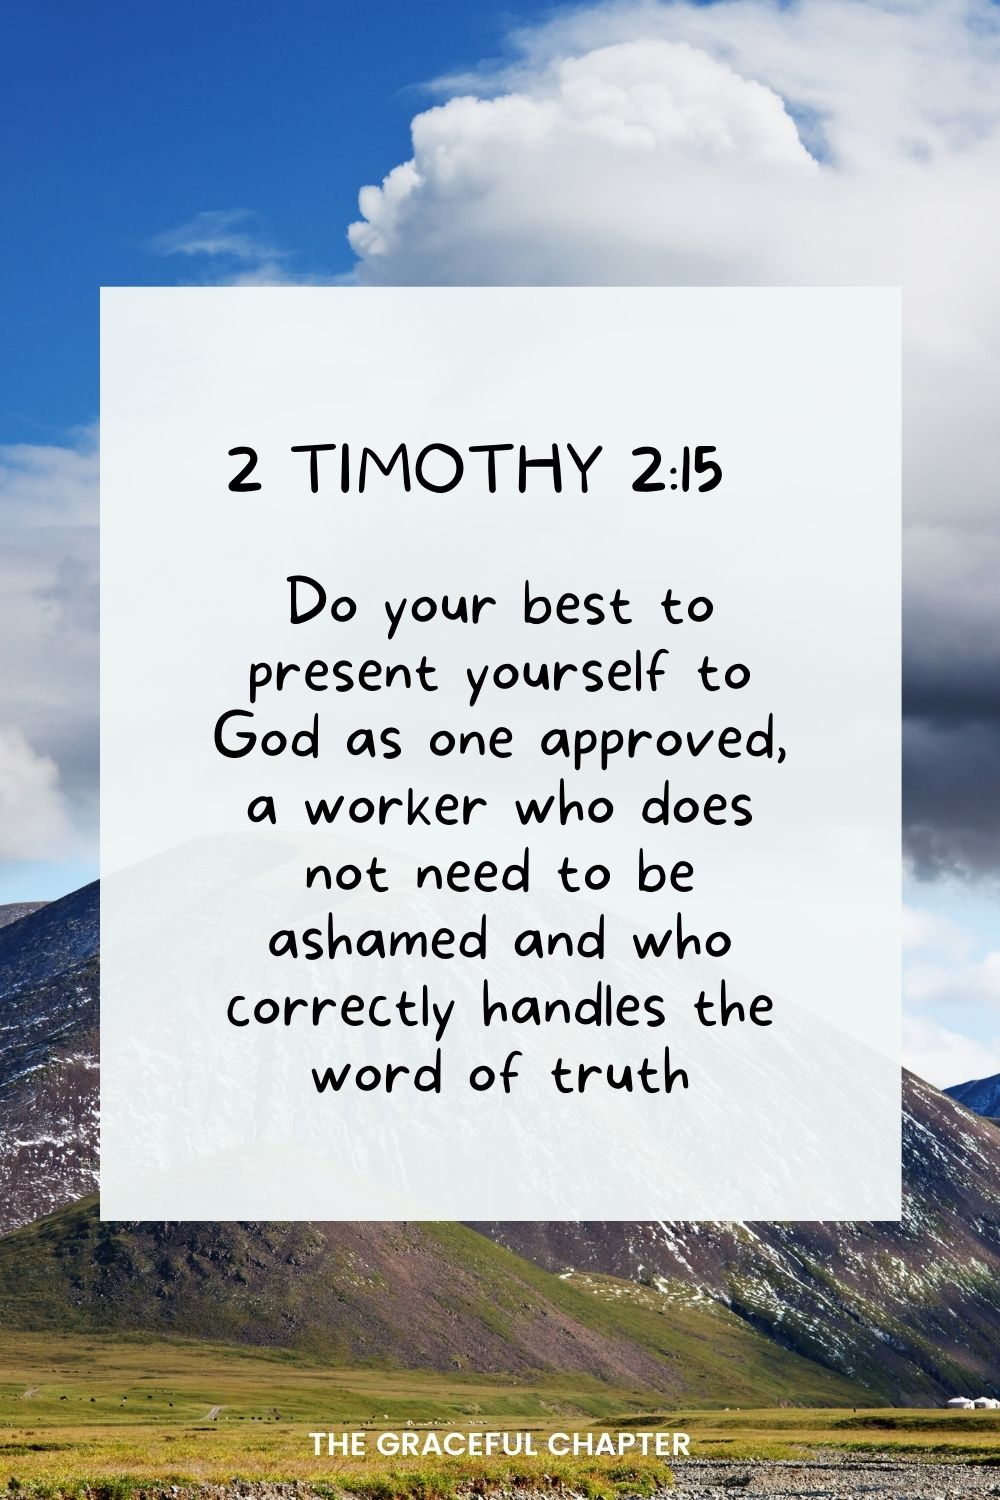 Do your best to present yourself to God as one approved, a worker who does not need to be ashamed and who correctly handles the word of truth. 2 Timothy 2:15